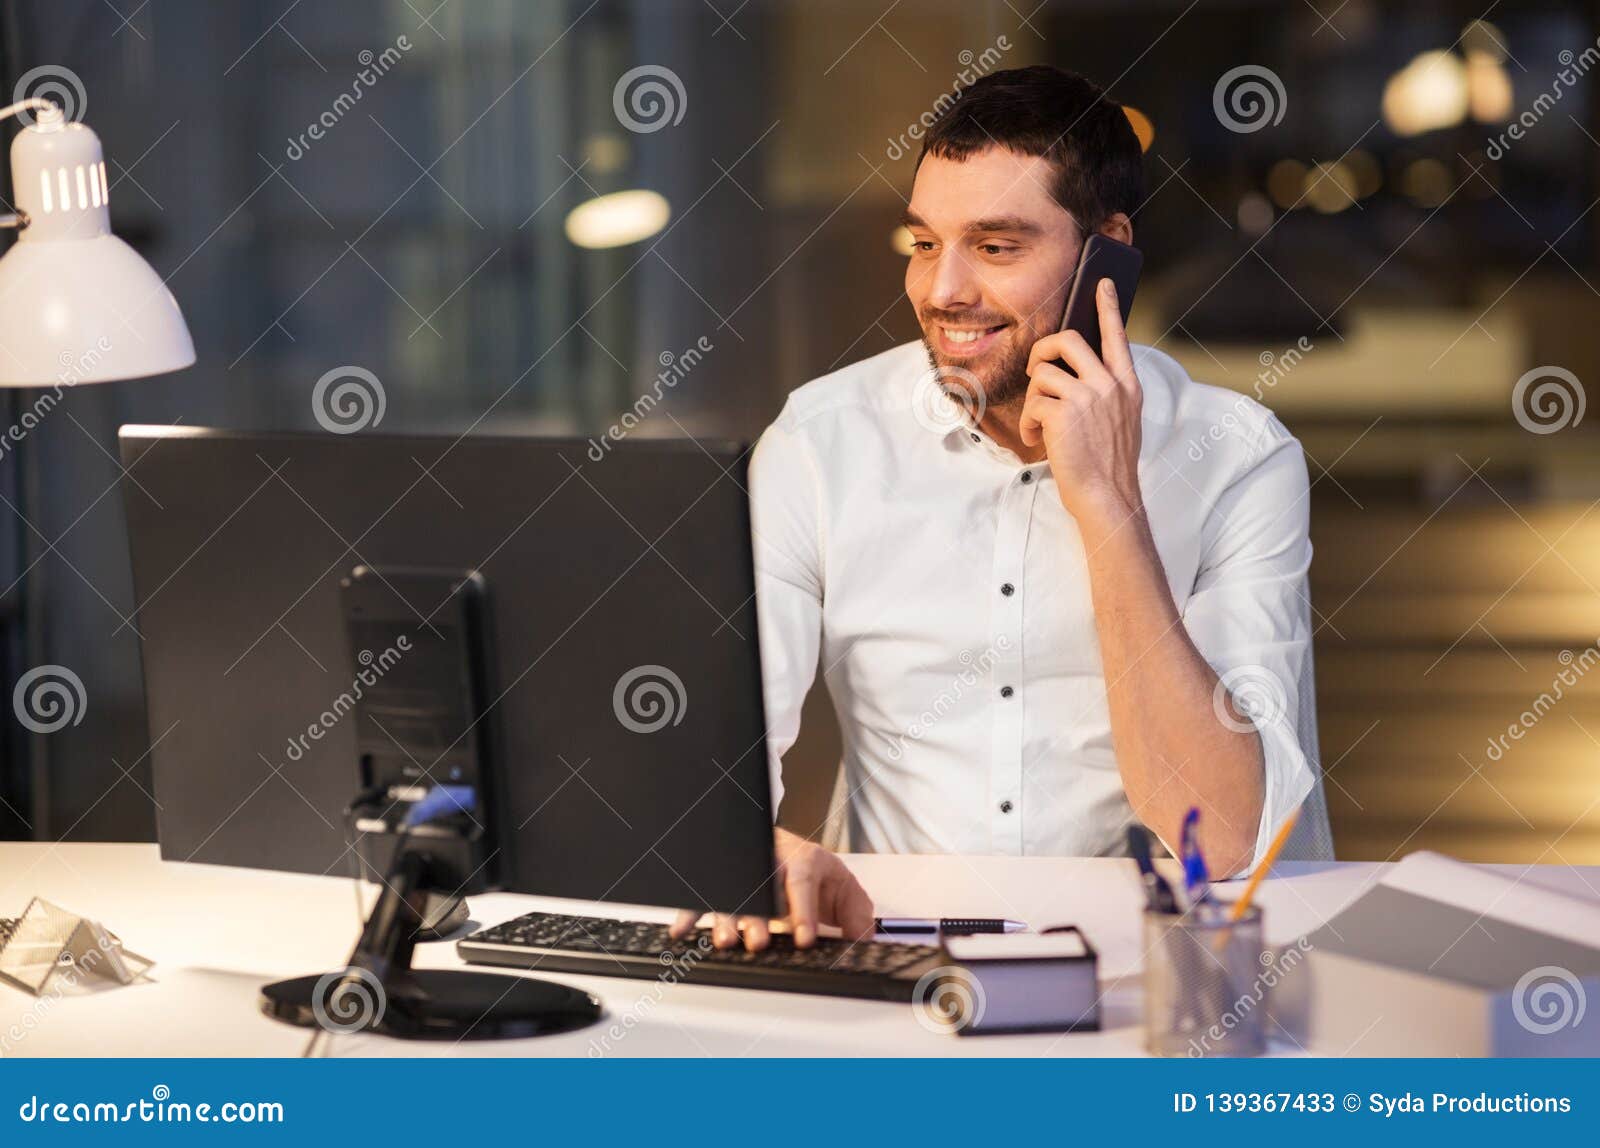 Businessman Calling On Smartphone At Night Office Stock